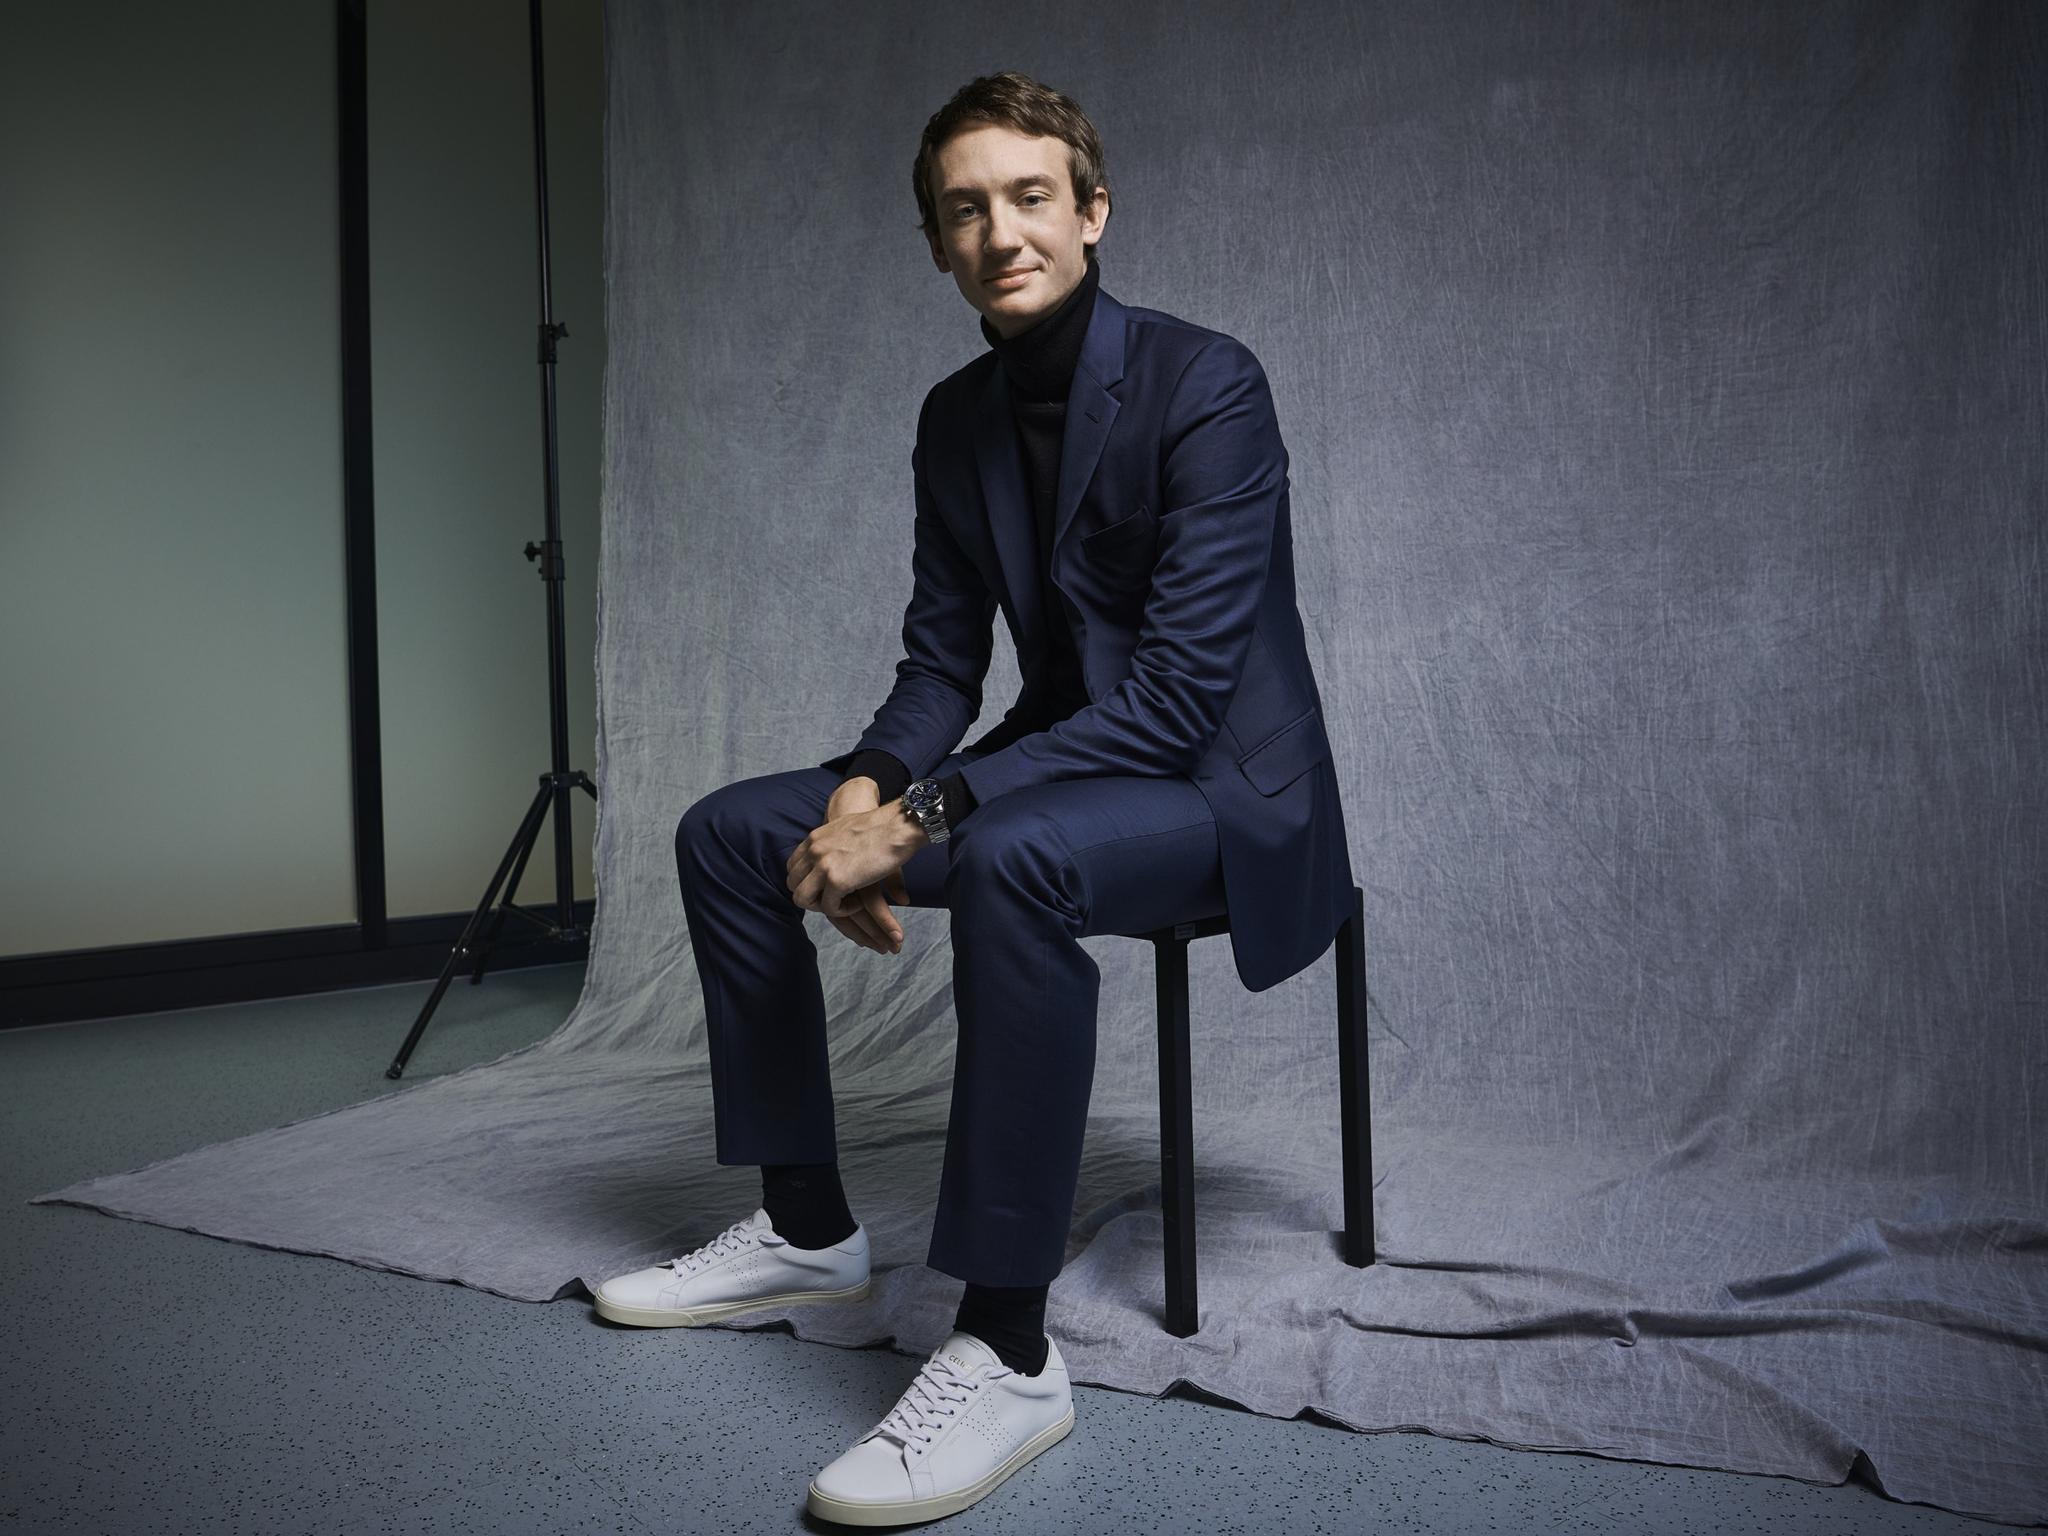 Bernard Arnault's Son Takes Over at TAG Heuer